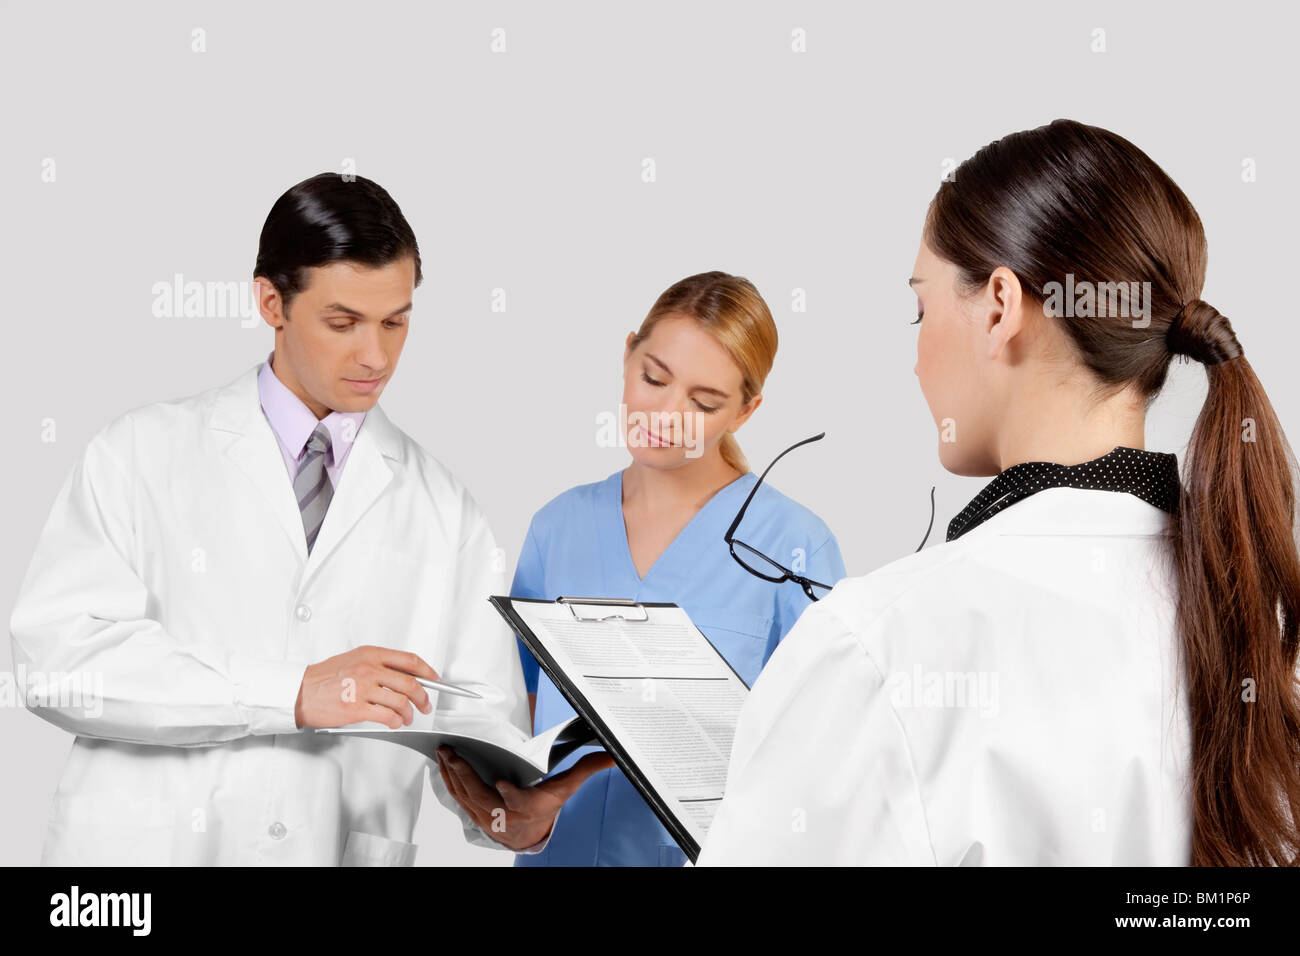 Doctors and a nurse discussing about medical record Stock Photo